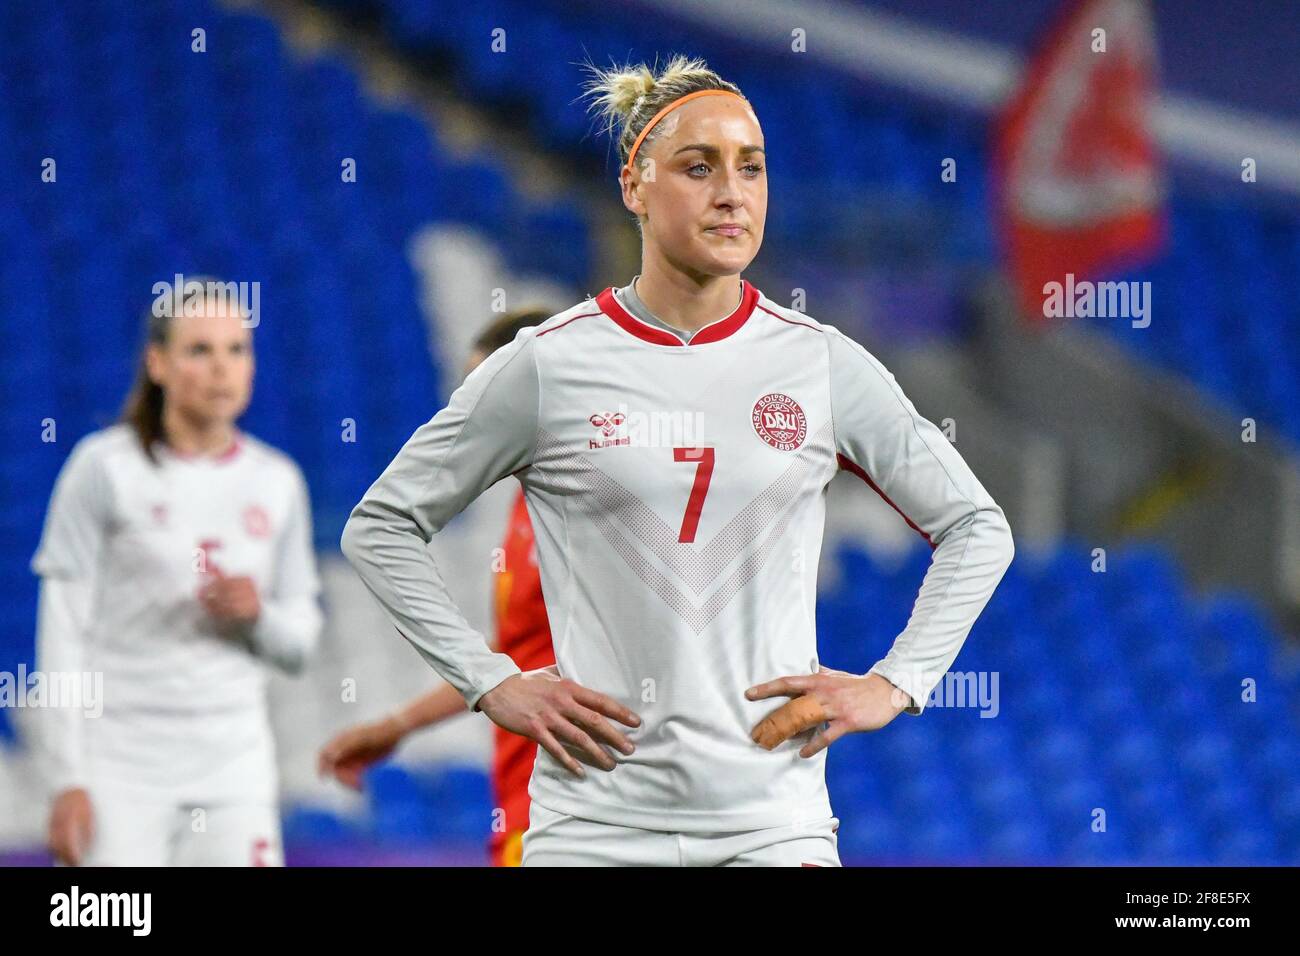 Cardiff, Wales. 13 April, 2021. Sanne Troelsgaard of Denmark Women on during Women's International Friendly match between Wales and at the Cardiff City Stadium in Cardiff, Wales, UK